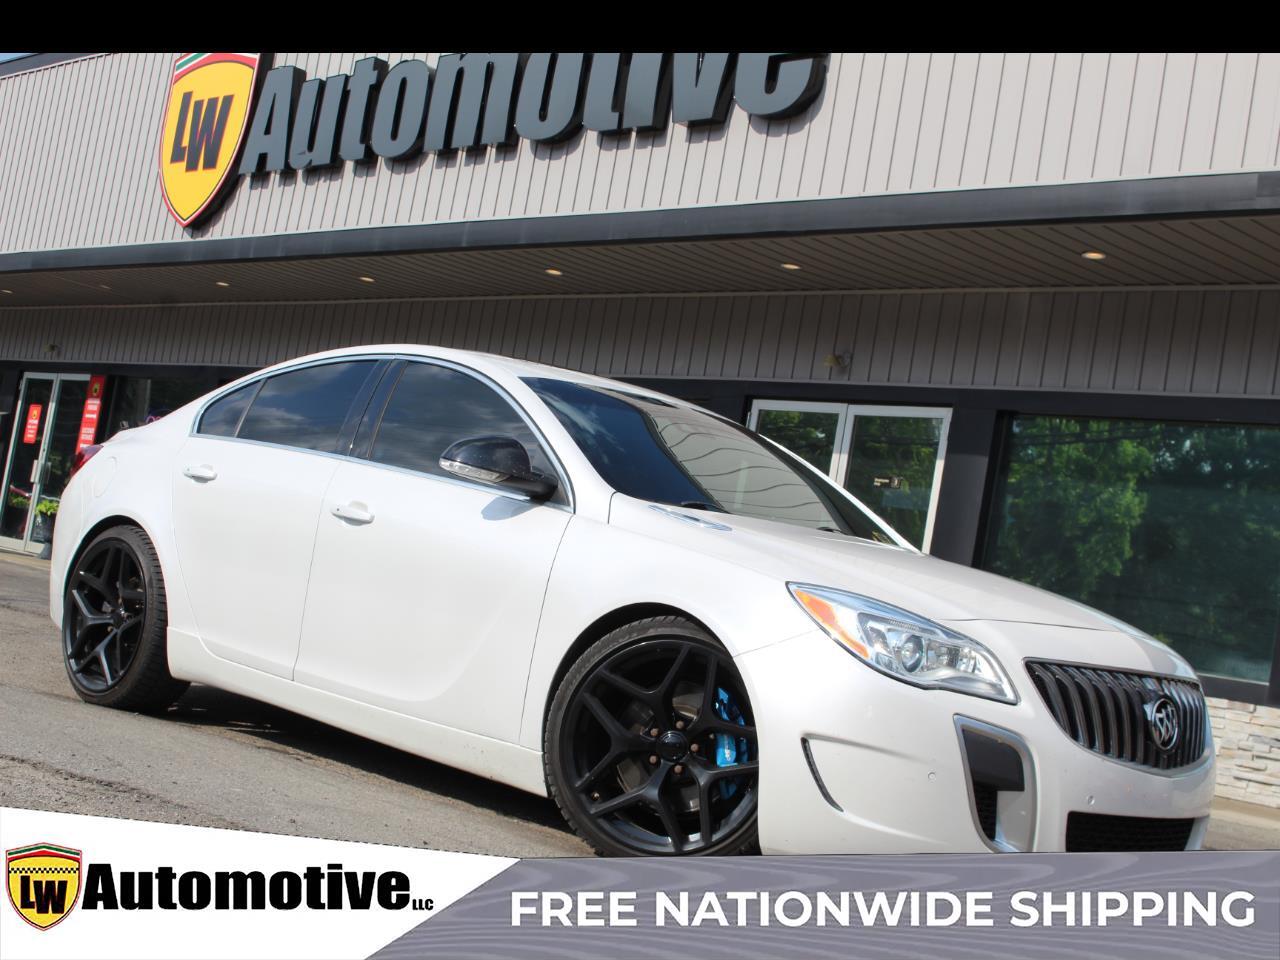 2016 Buick Regal 4dr Sdn GS FWD